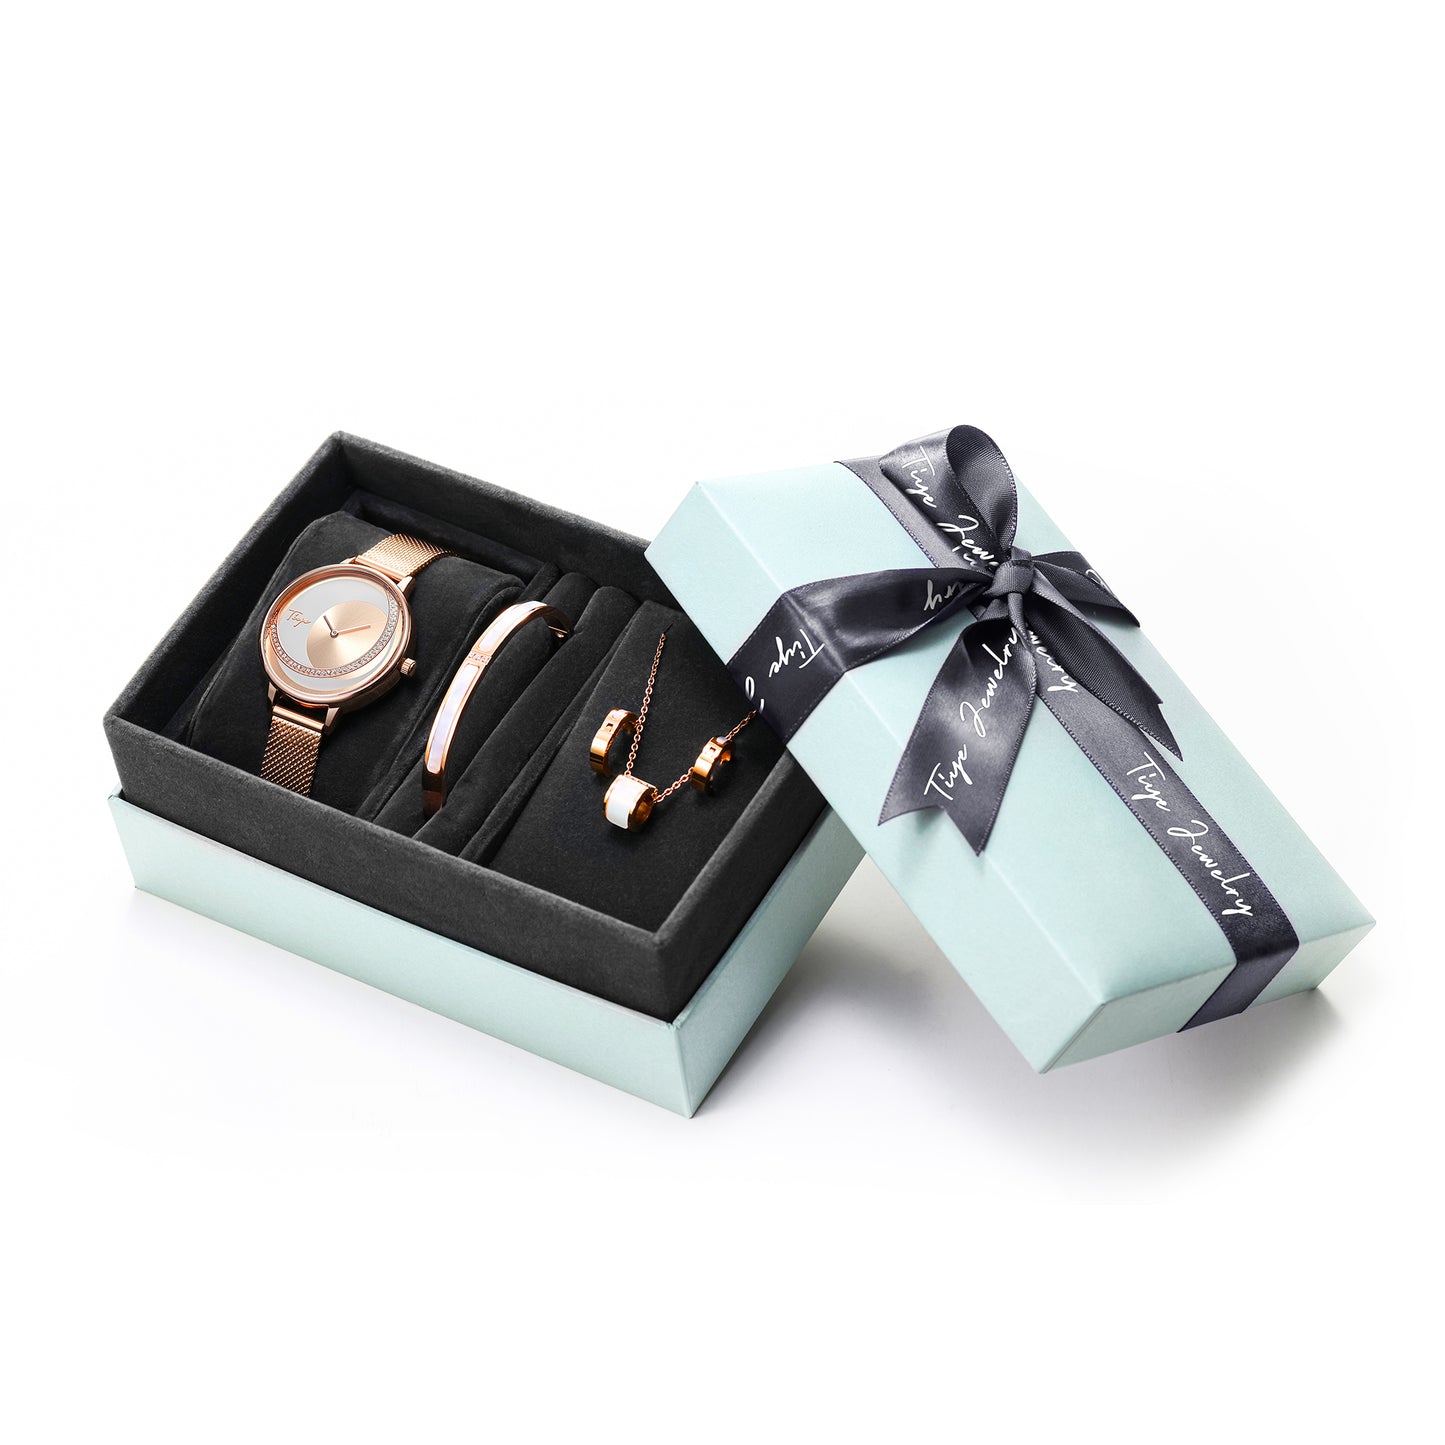 Diamond Shine925 Sterling SilverRose GoldRhodium PlatedAffordable JewelryAffordable Women WatchesAffordable Women Jewelry Affordable Women Watch Sets | stainless steel and rose gold watch